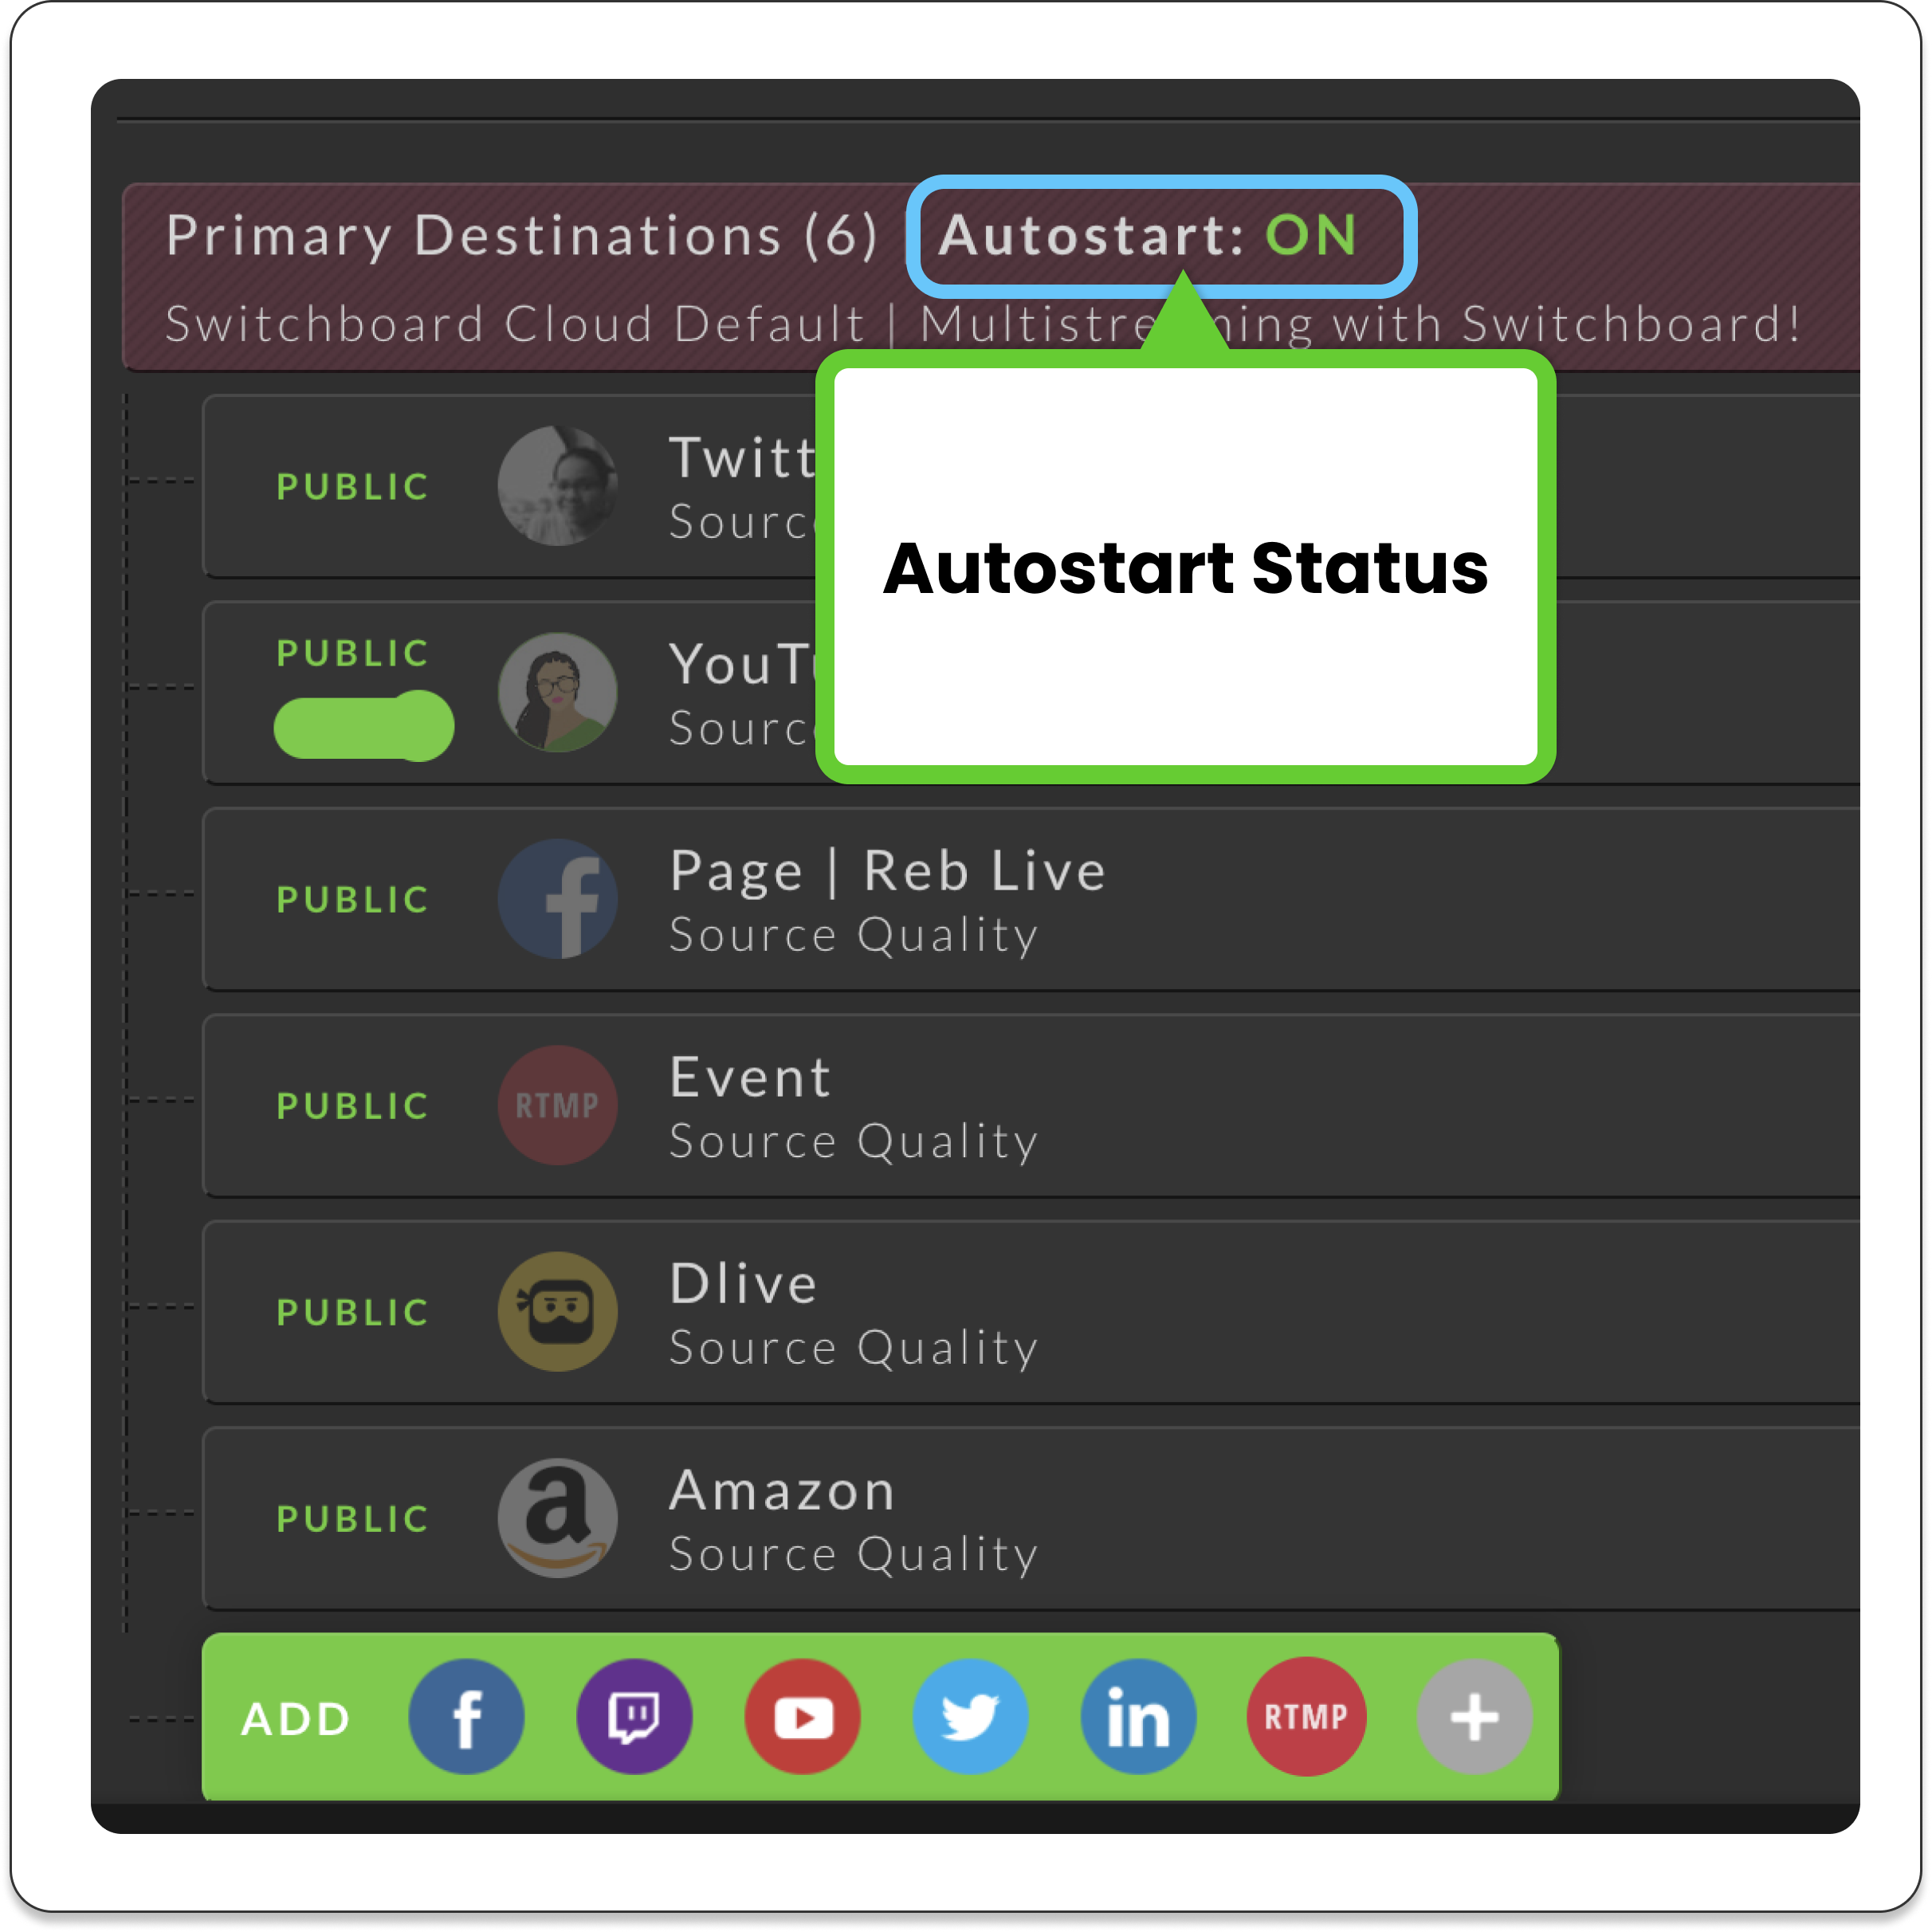 switchboardlive_workflow-page_destinations_pane_autostart_status_on.png